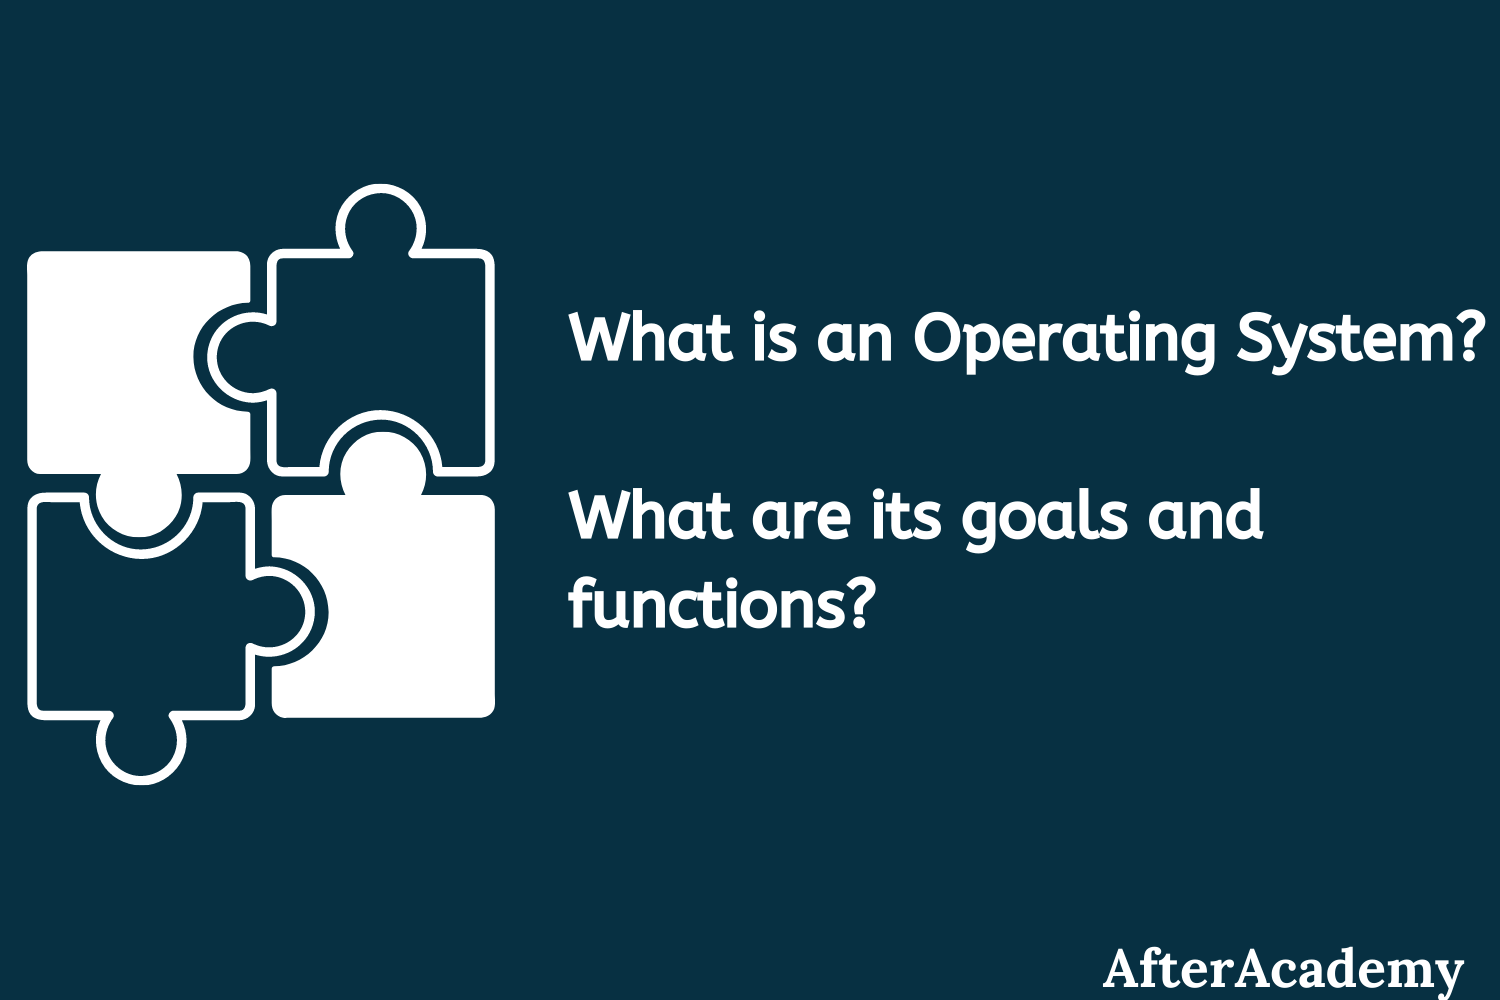 What is an Operating System and what are the goals and functions of an Operating System?